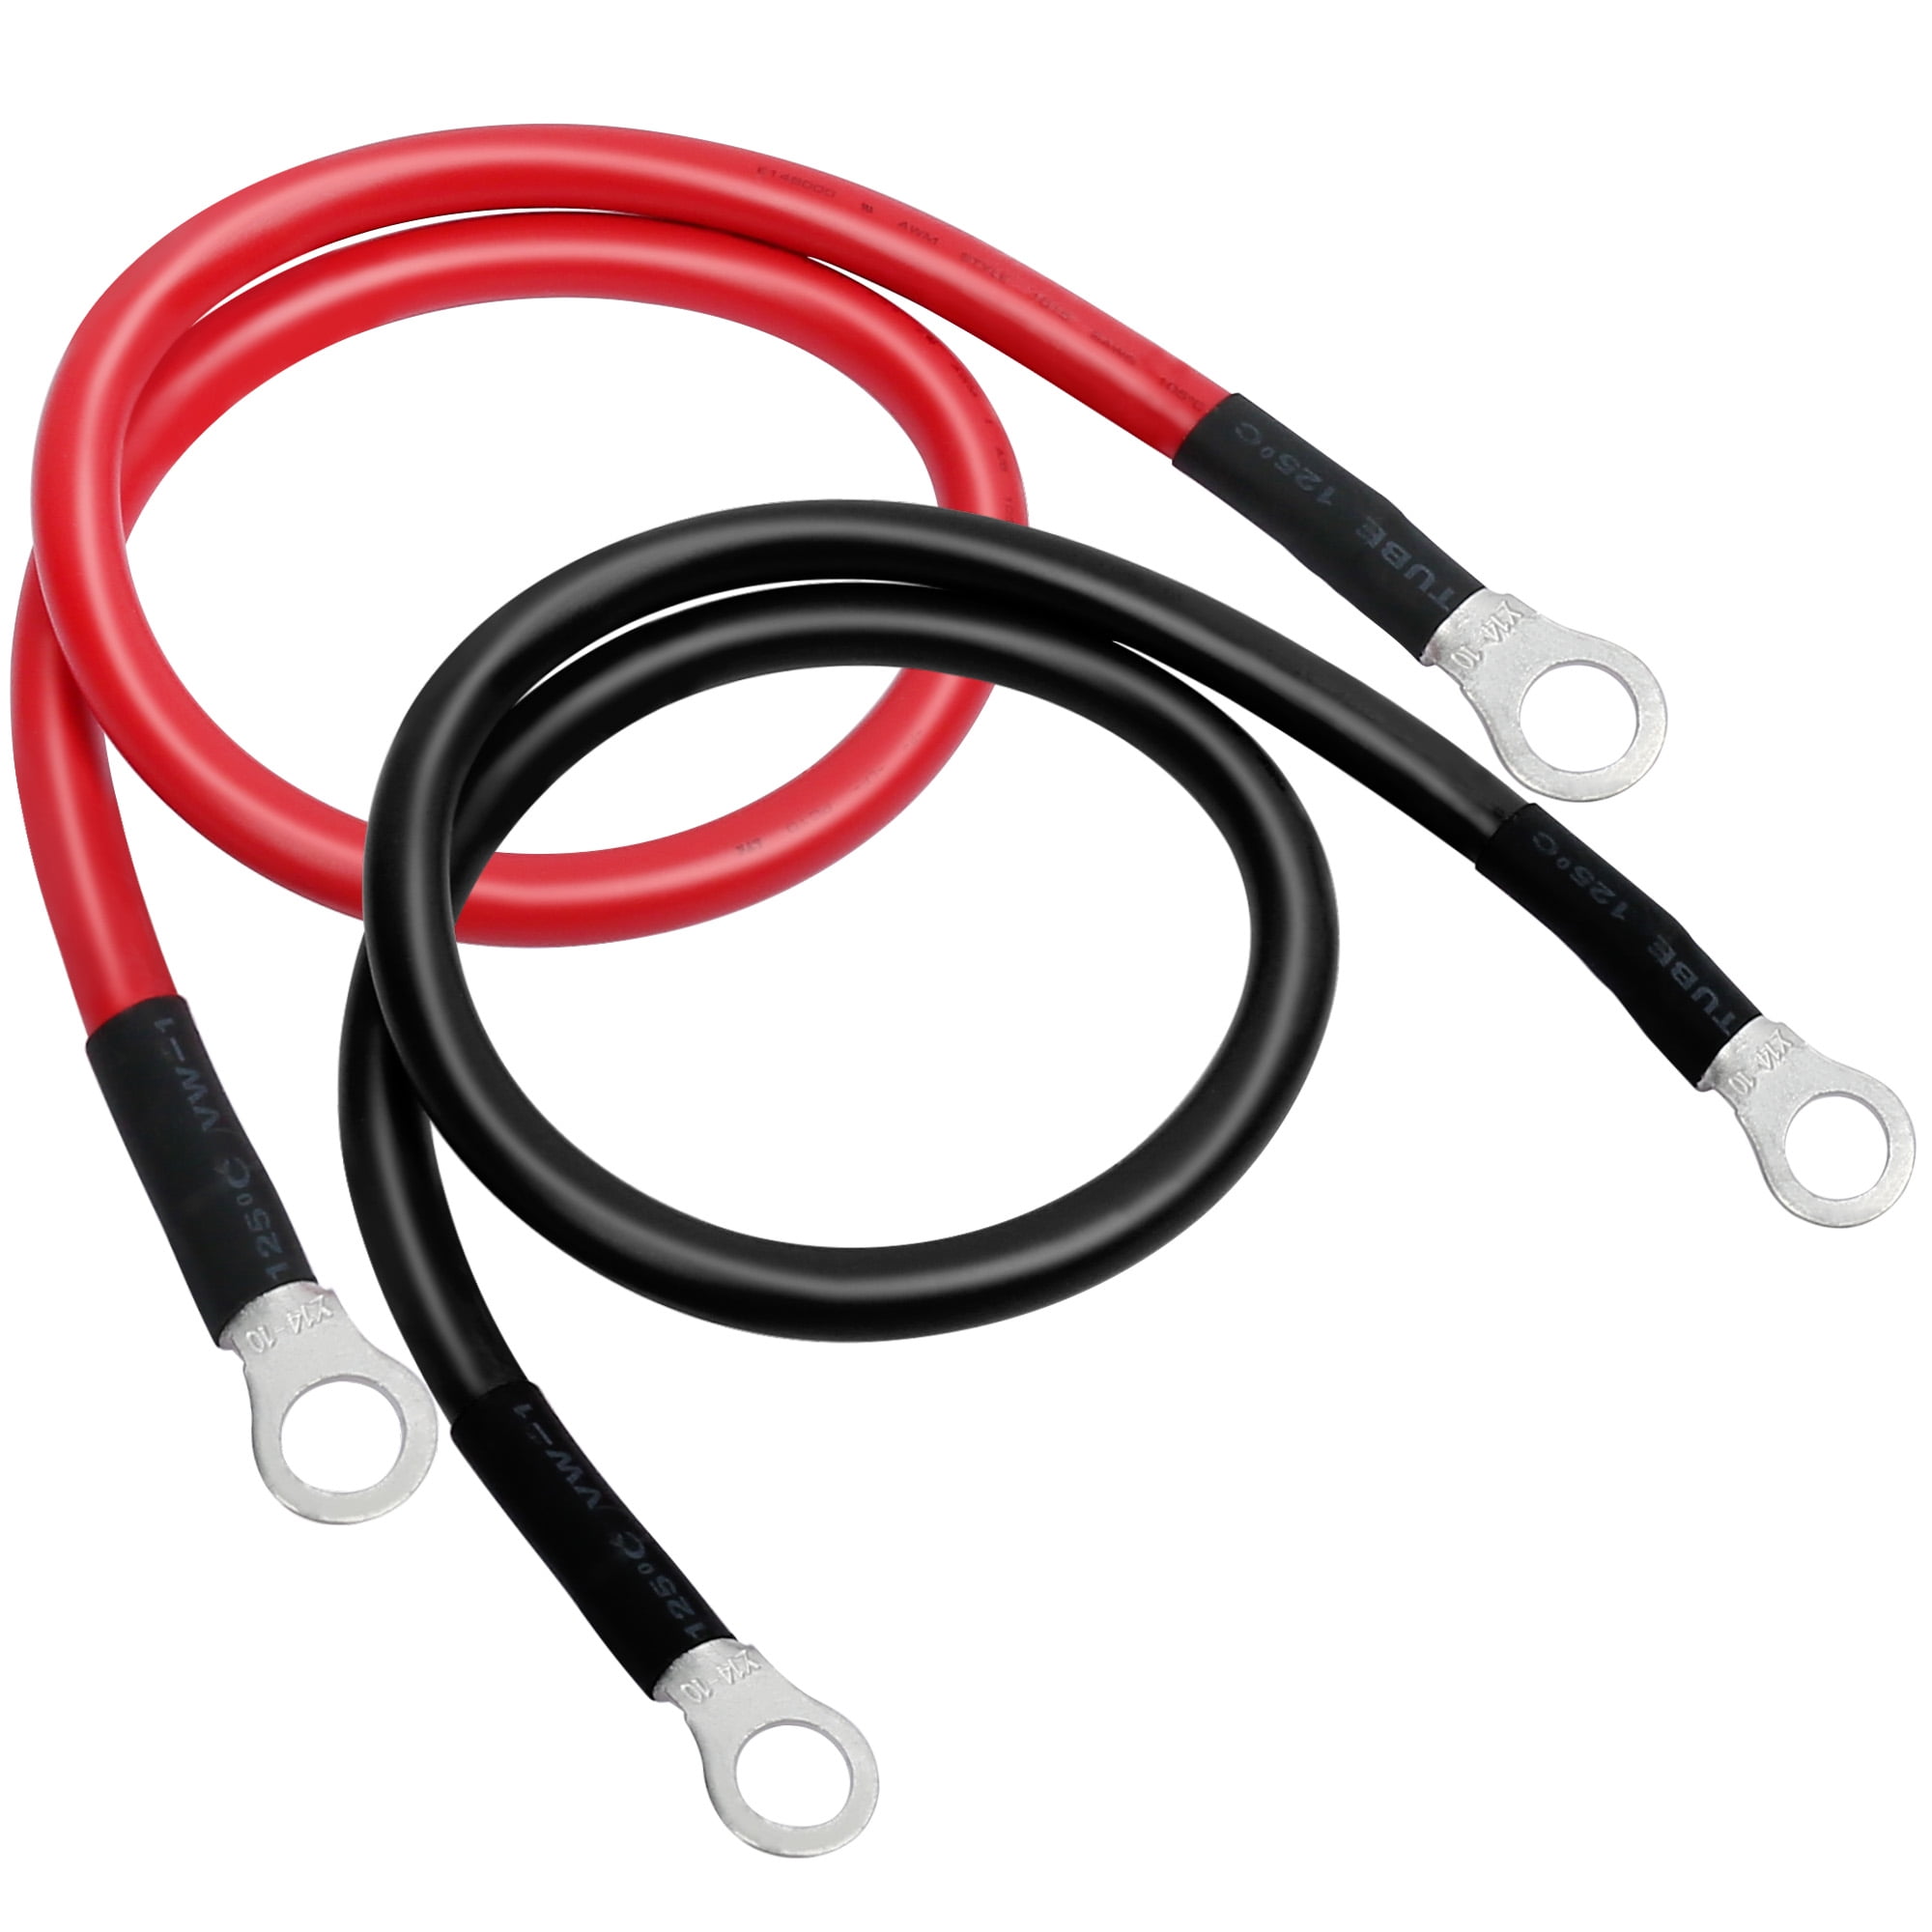 Bolatus 100cm Battery Inverter Cable 12v 25mm² 3AWG Battery Cable Red and Black Auto Battery Leads with Ring Terminals Copper Flexible Wire for Truck Motorcycle Solar RV Marine